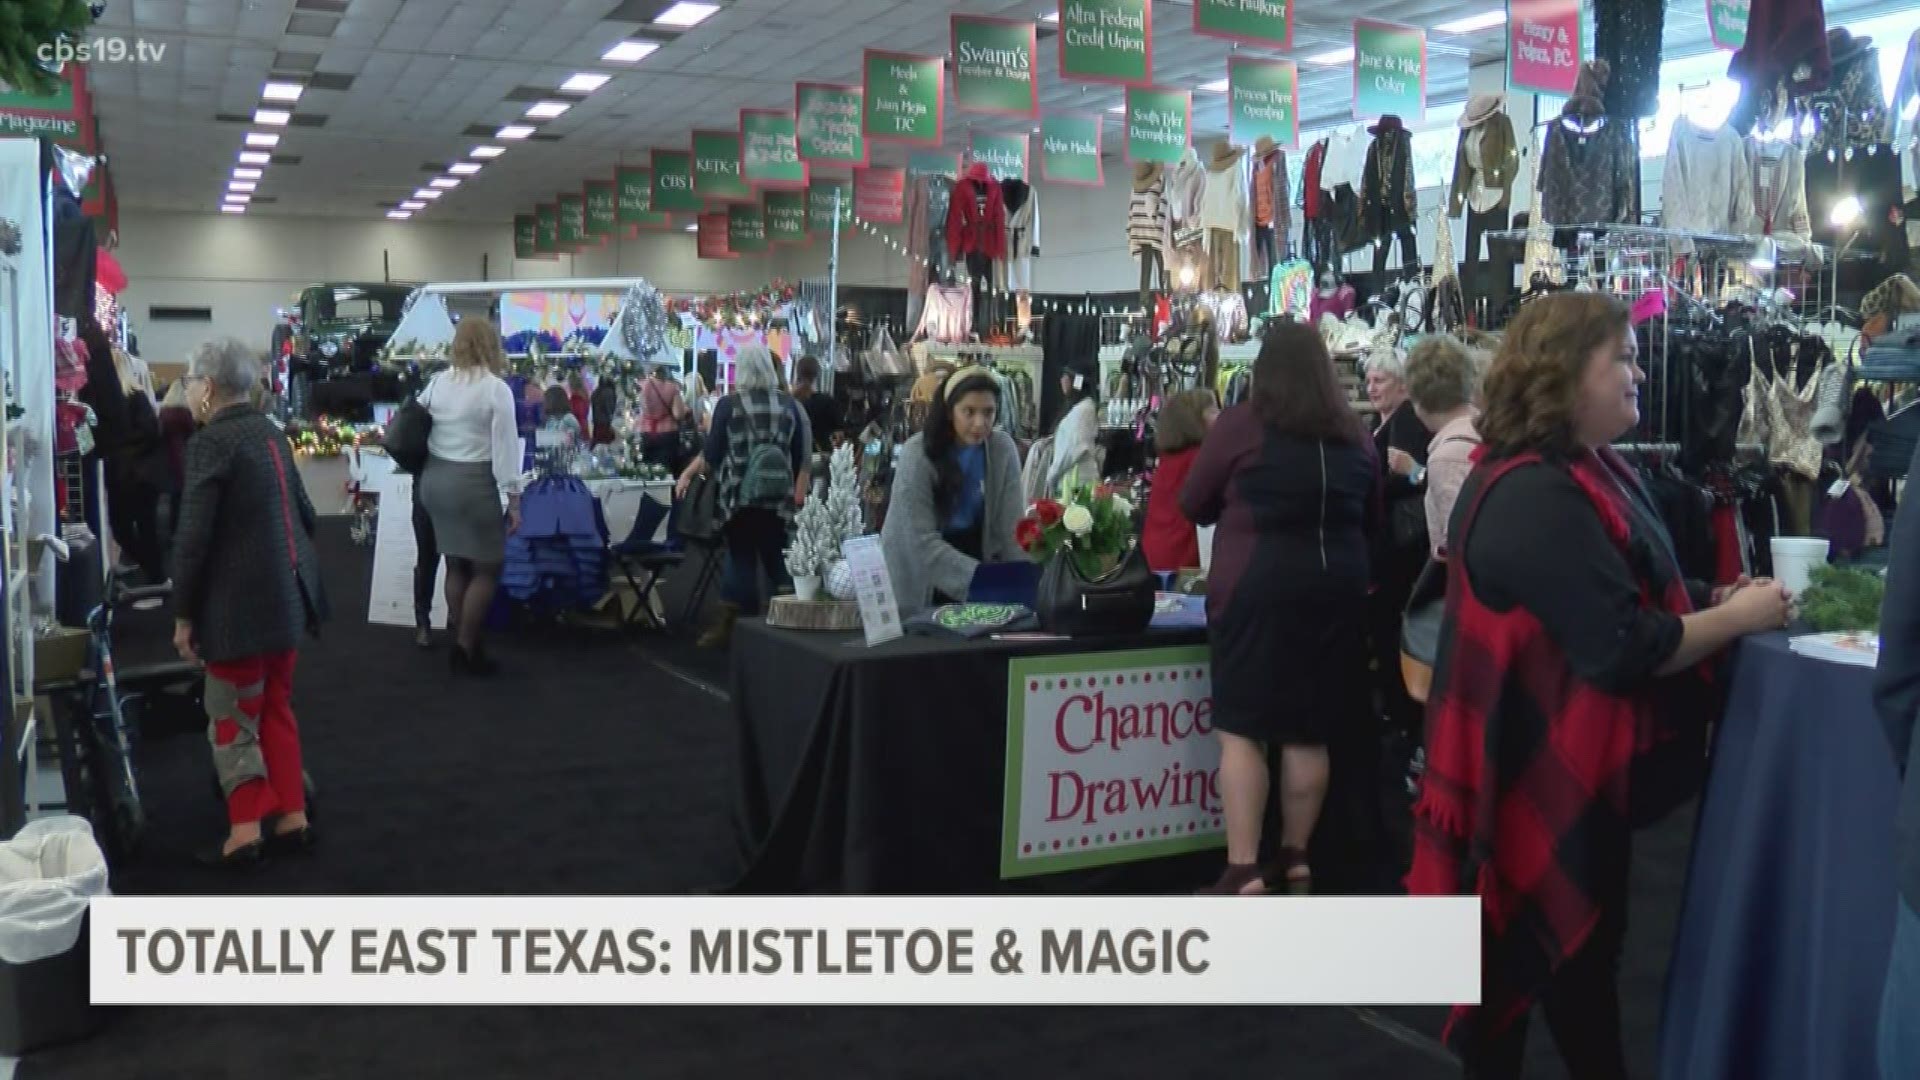 For 41 years, Mistletoe & Magic has helped raise crucial funds for non-profit organizations in Smith Co. and East Texans help simply by shopping.